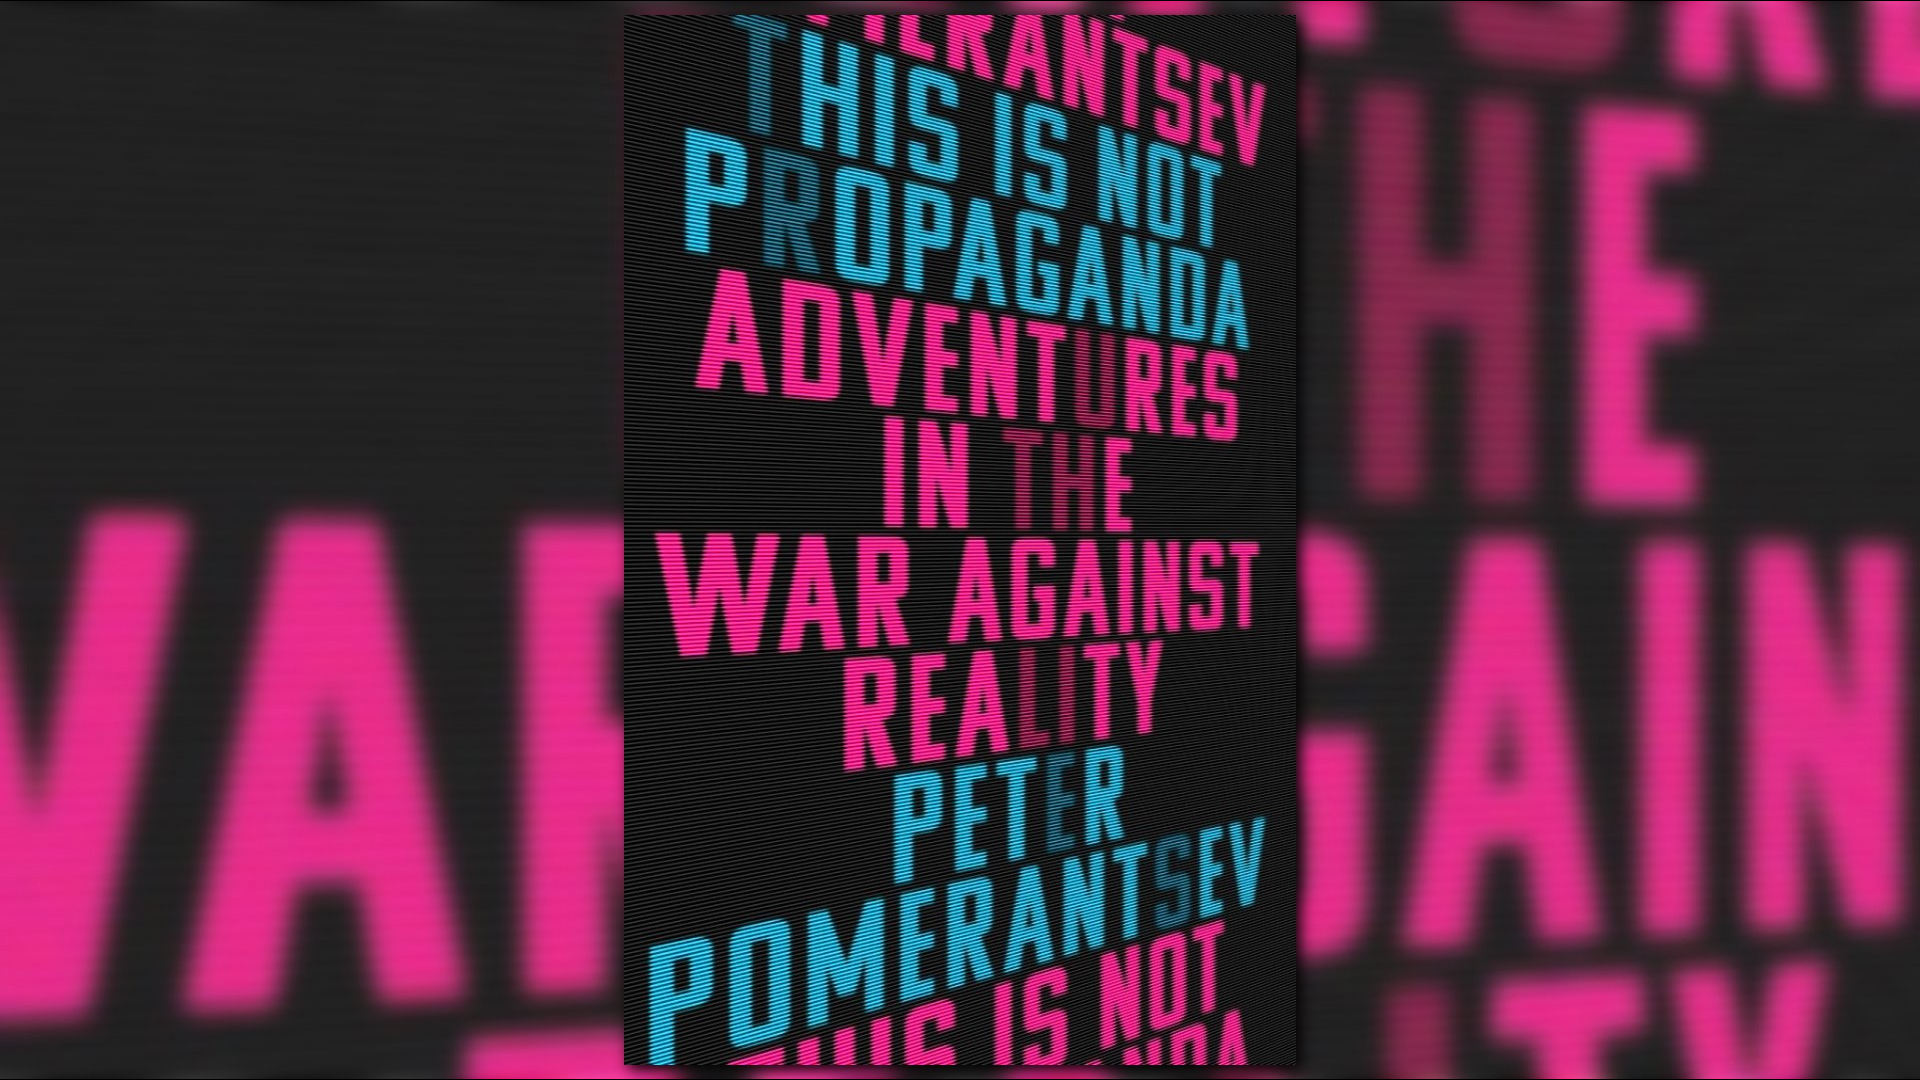 Peter Pomerantsev's new book "This Is Not Propaganda: Adventures in the War Against Reality" looks at media manipulation worldwide.